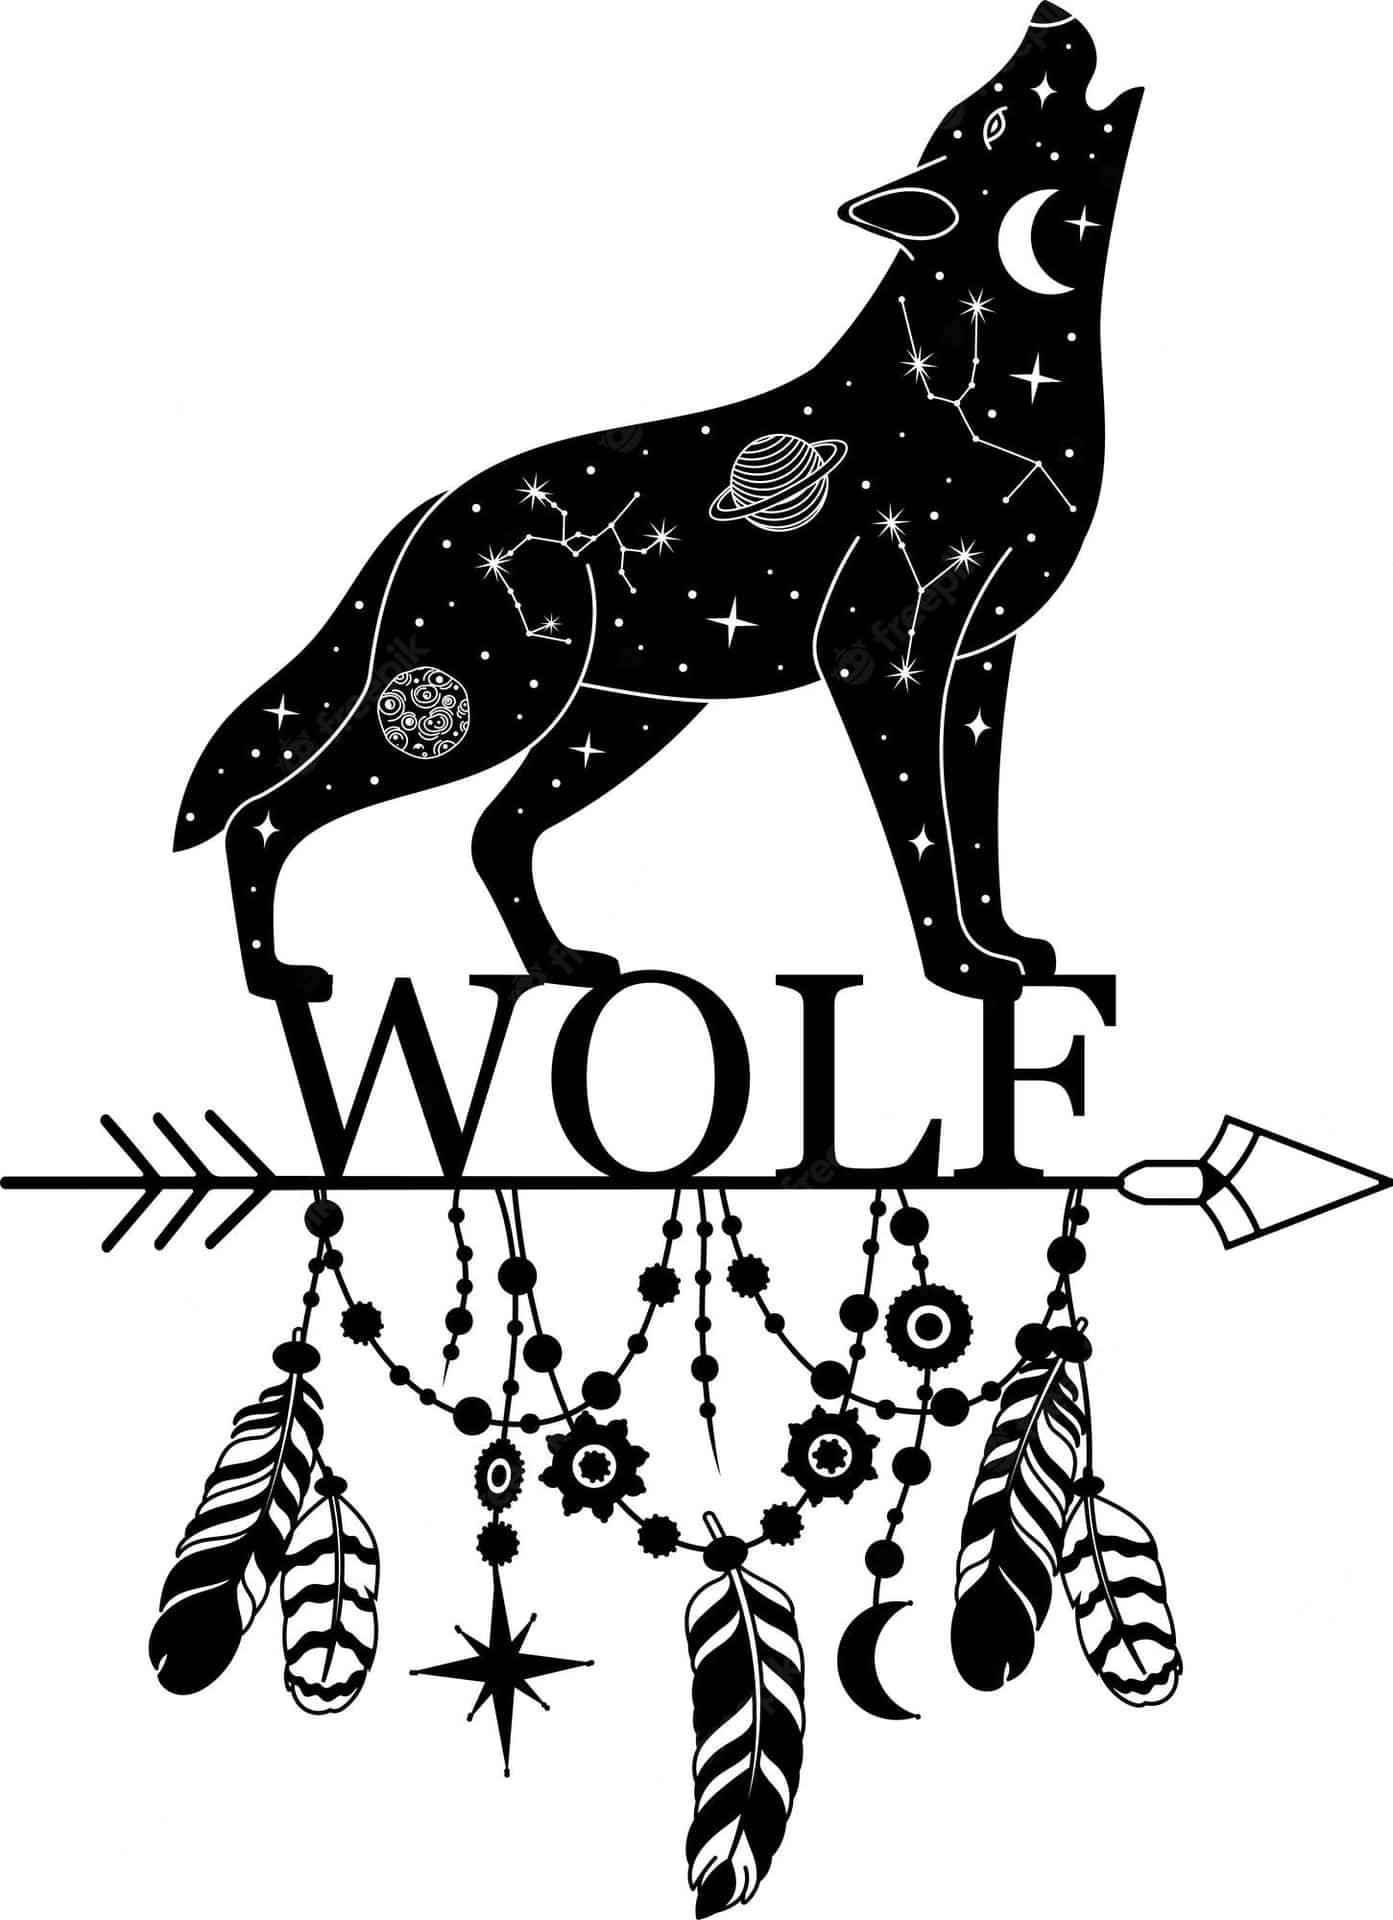 Majestic Wolf Silhouette Under a Starry Sky Wallpaper